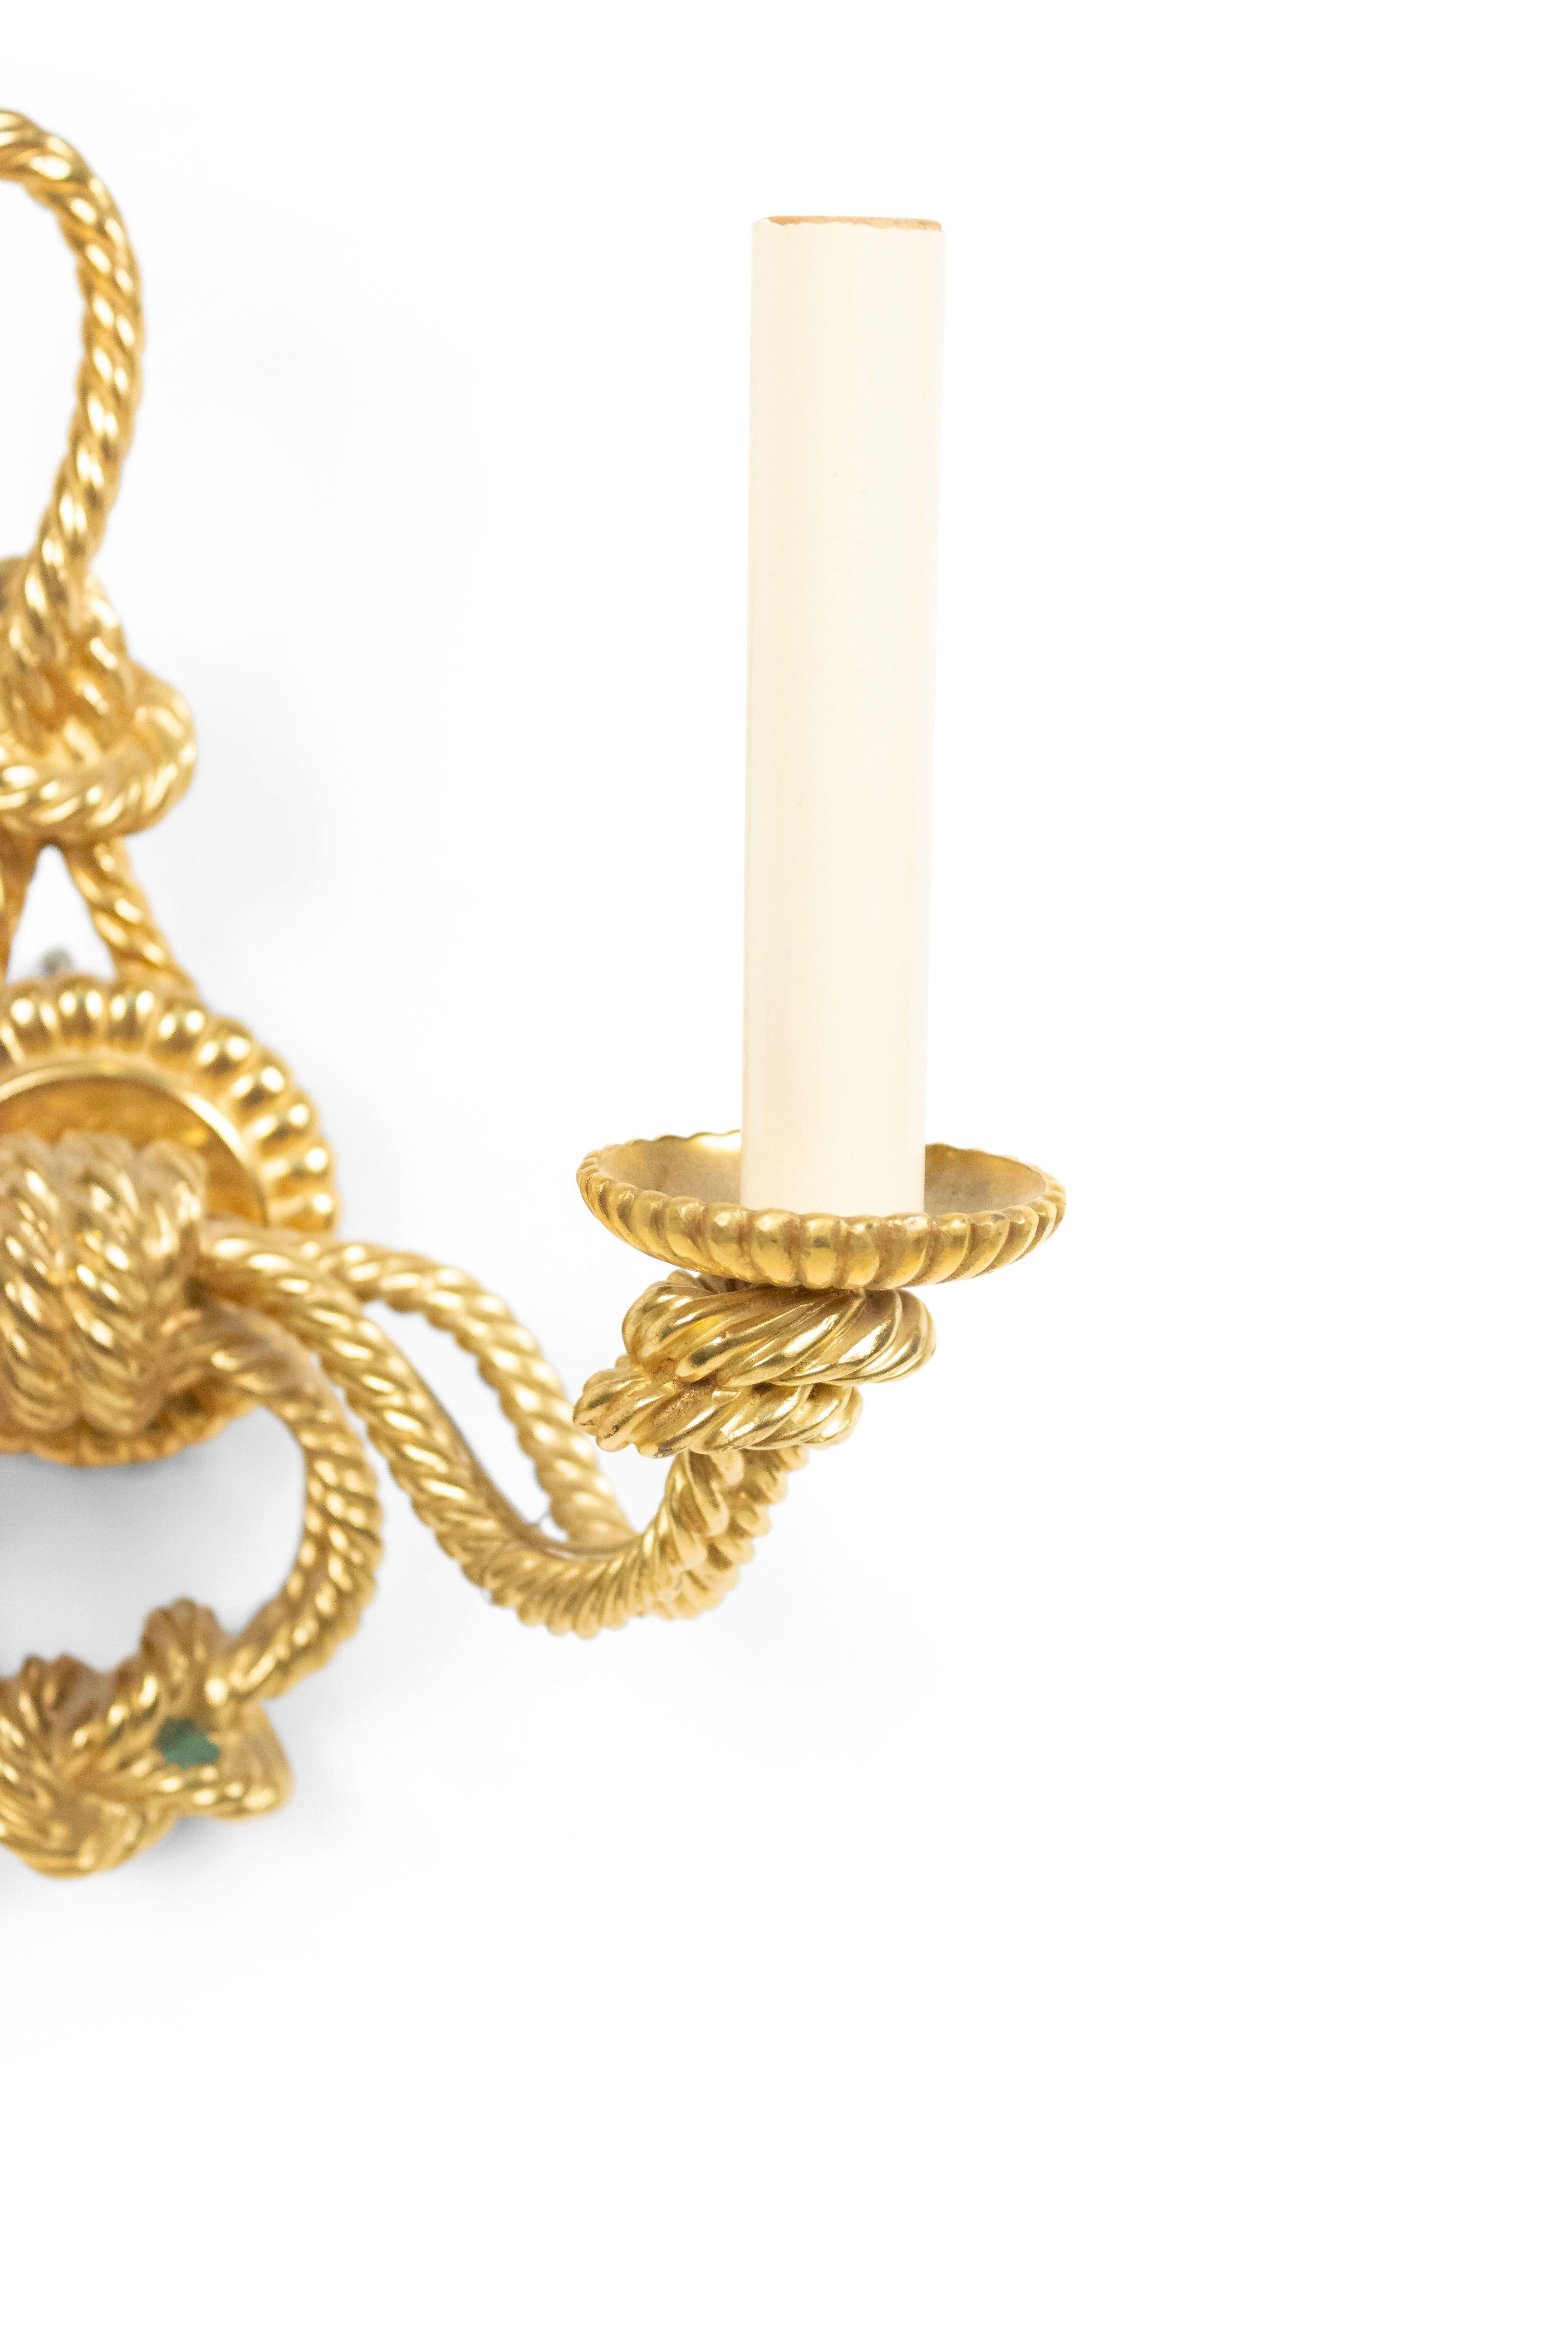 Rope and tassel design (20th century) gilt bronze wall sconce with two arms.